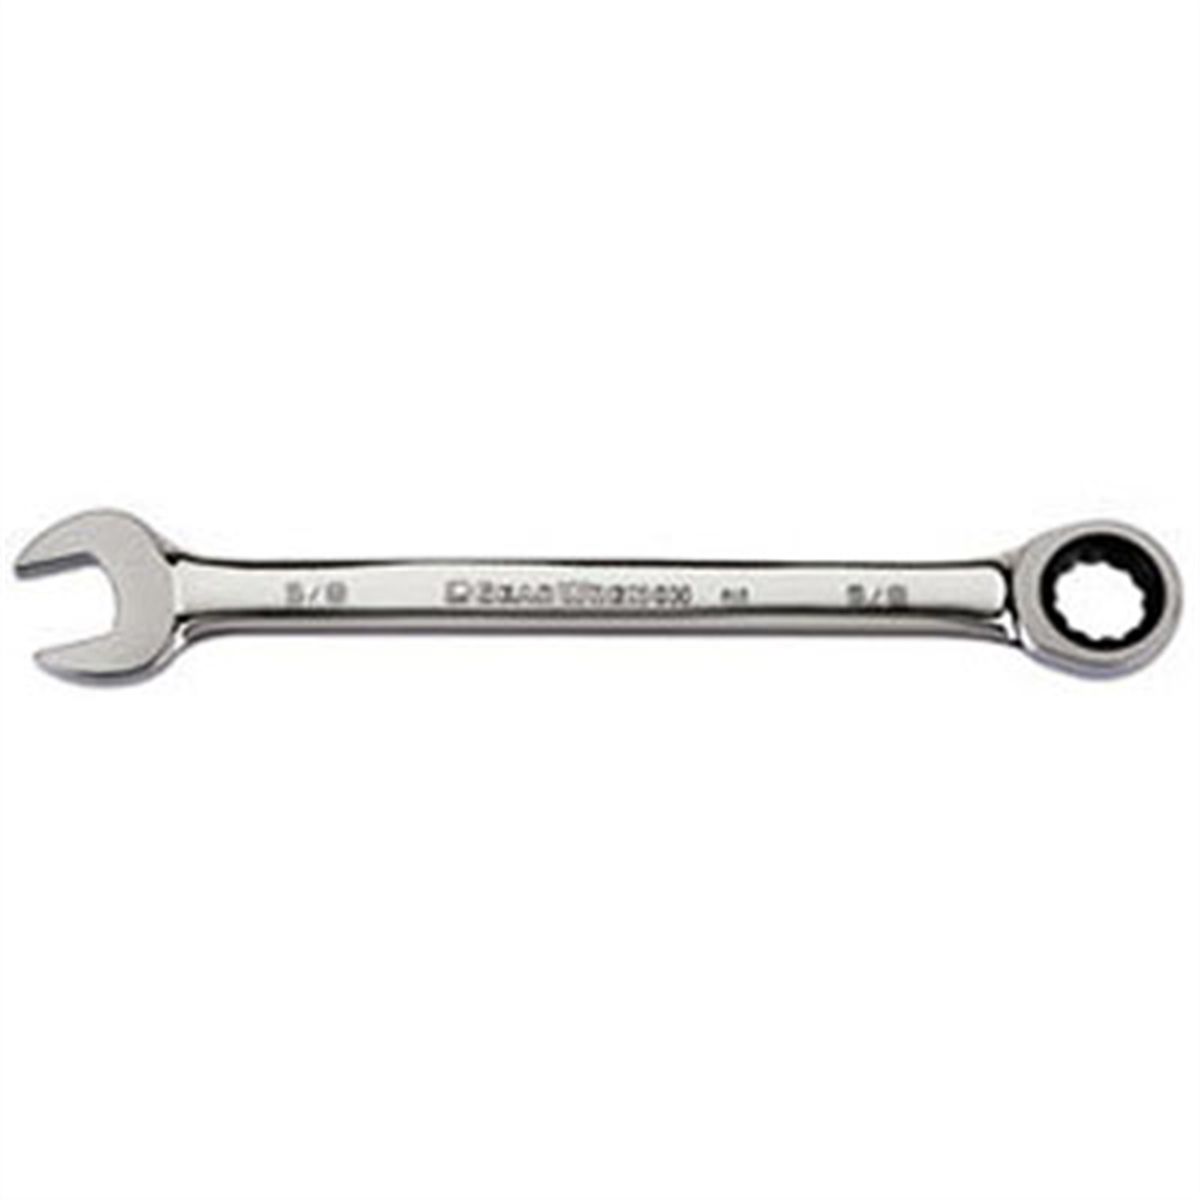 Wrench Ratcheting Combination - 3/4 In Gearwrench...